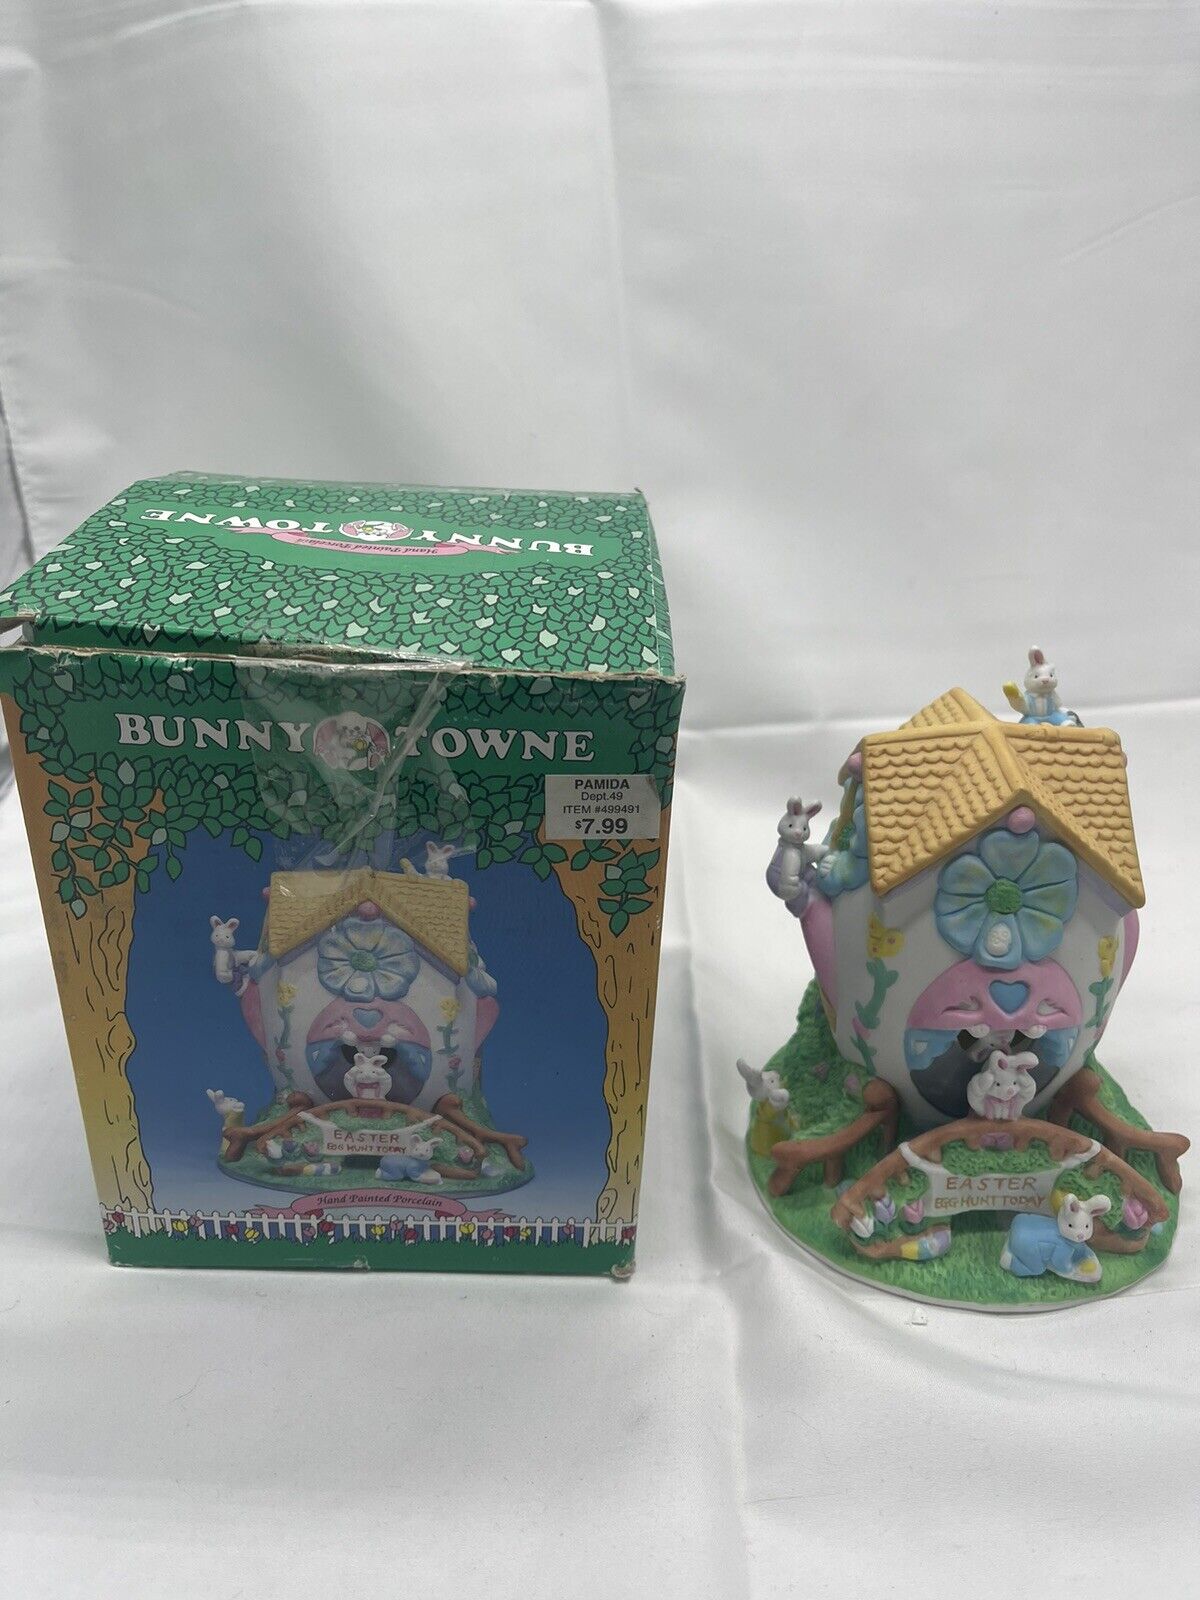 Vintage Easter Bunny Towne House Bunnies Rabbits Eggs Easter Spring Porcelain